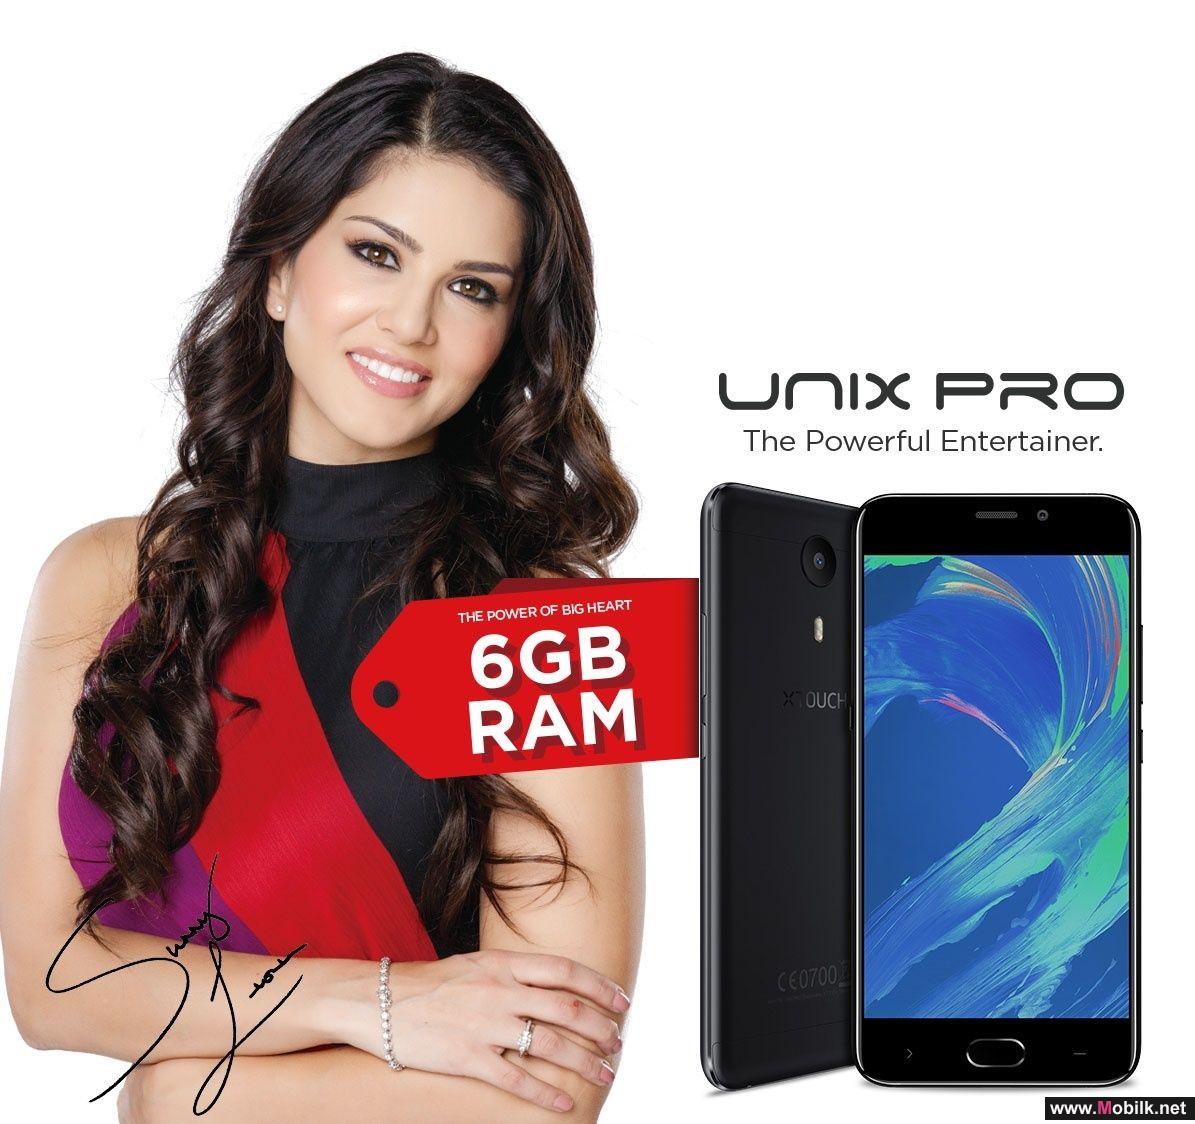 Sunny Leone to officially unveil XTOUCH UNIX PRO at GITEX Shopper